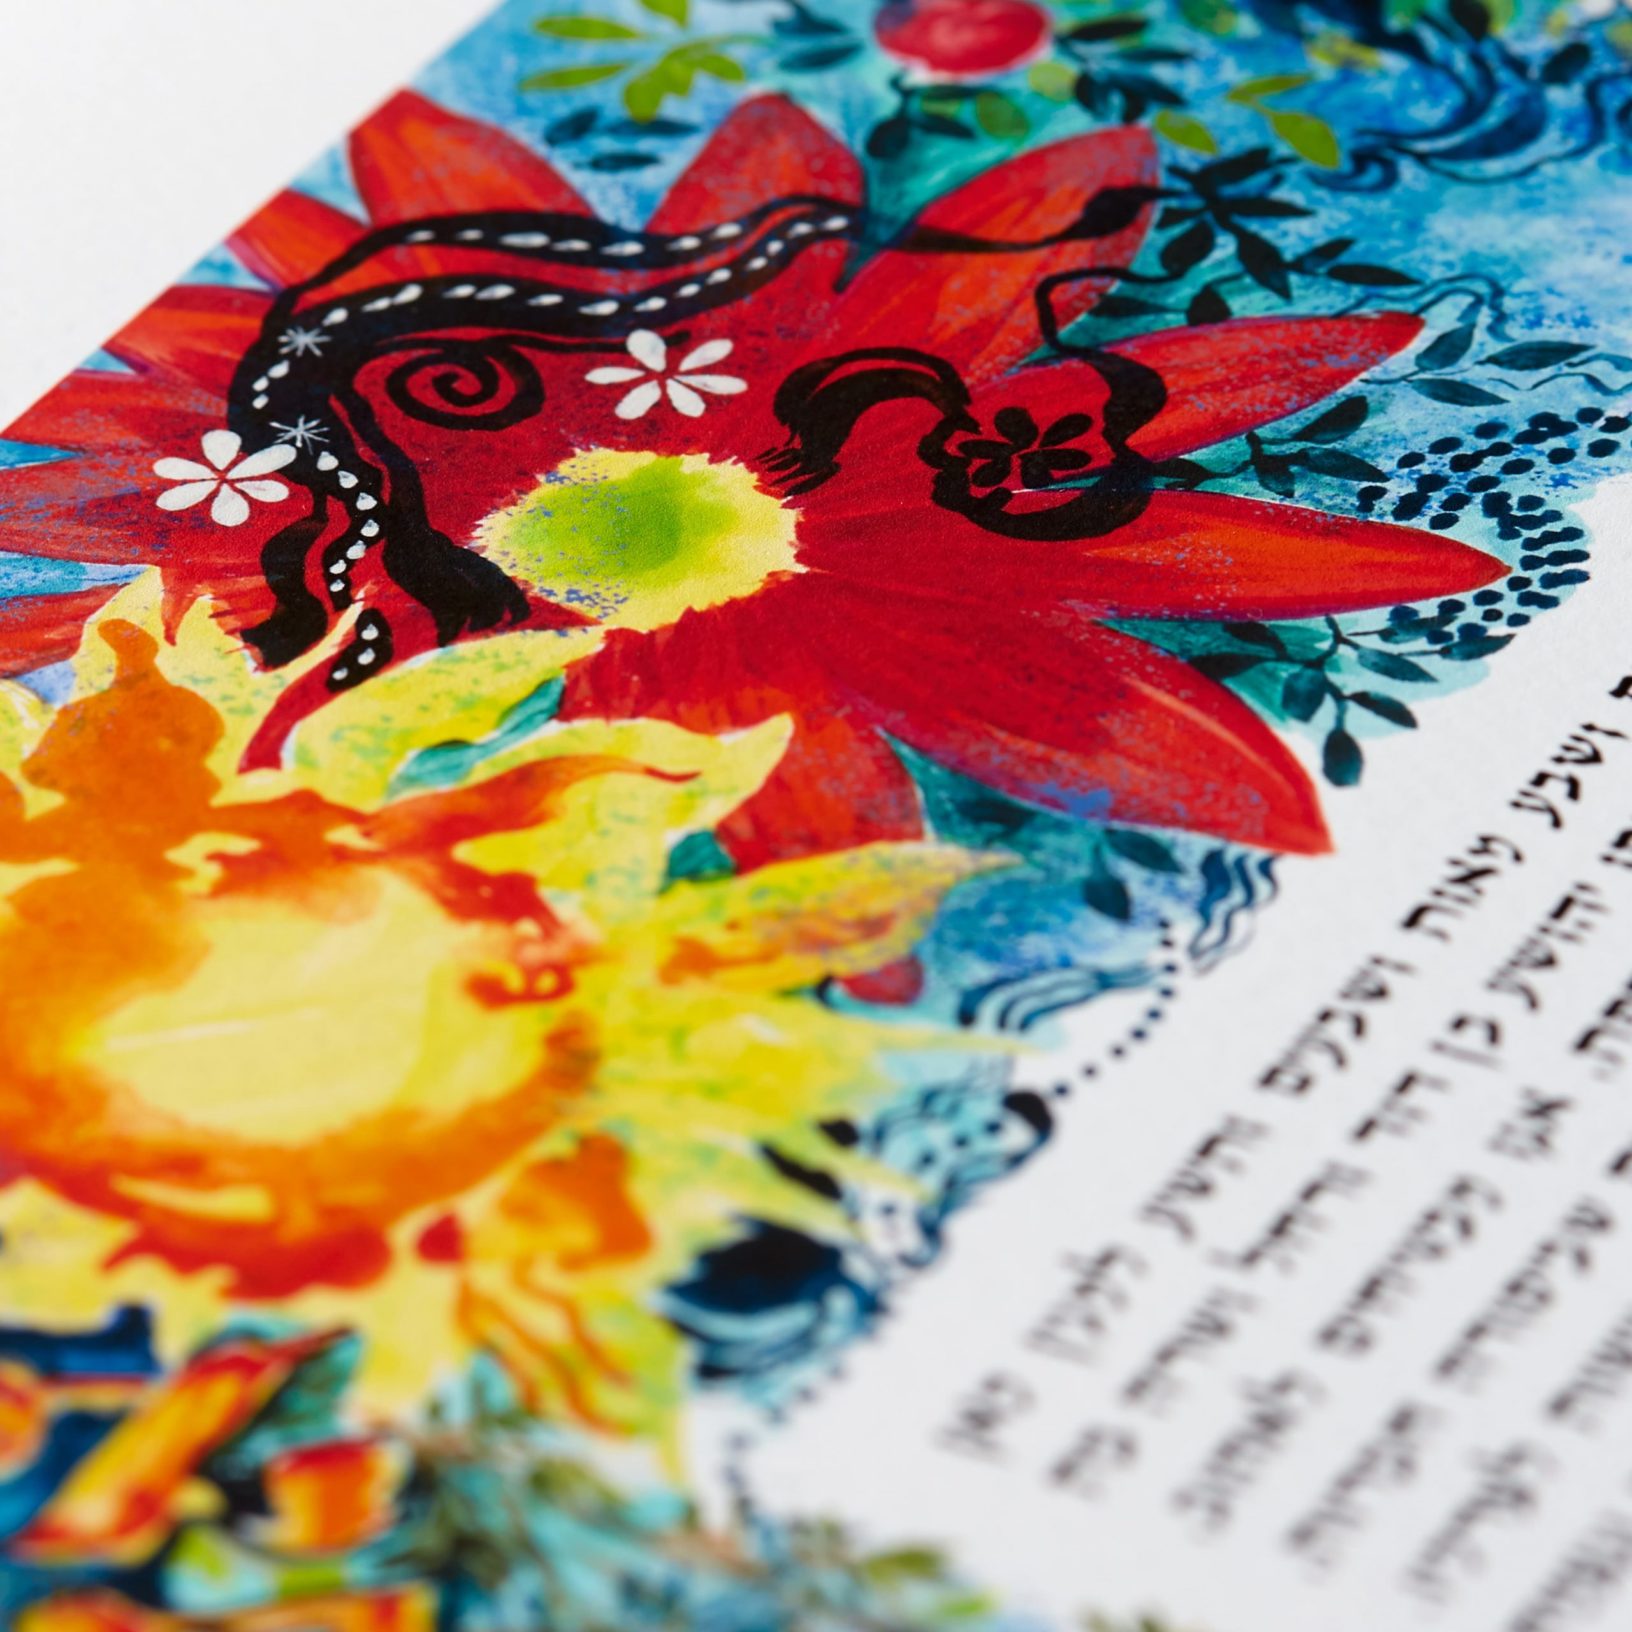 Firefly Ketubah Marriage Contracts by Judith Joseph